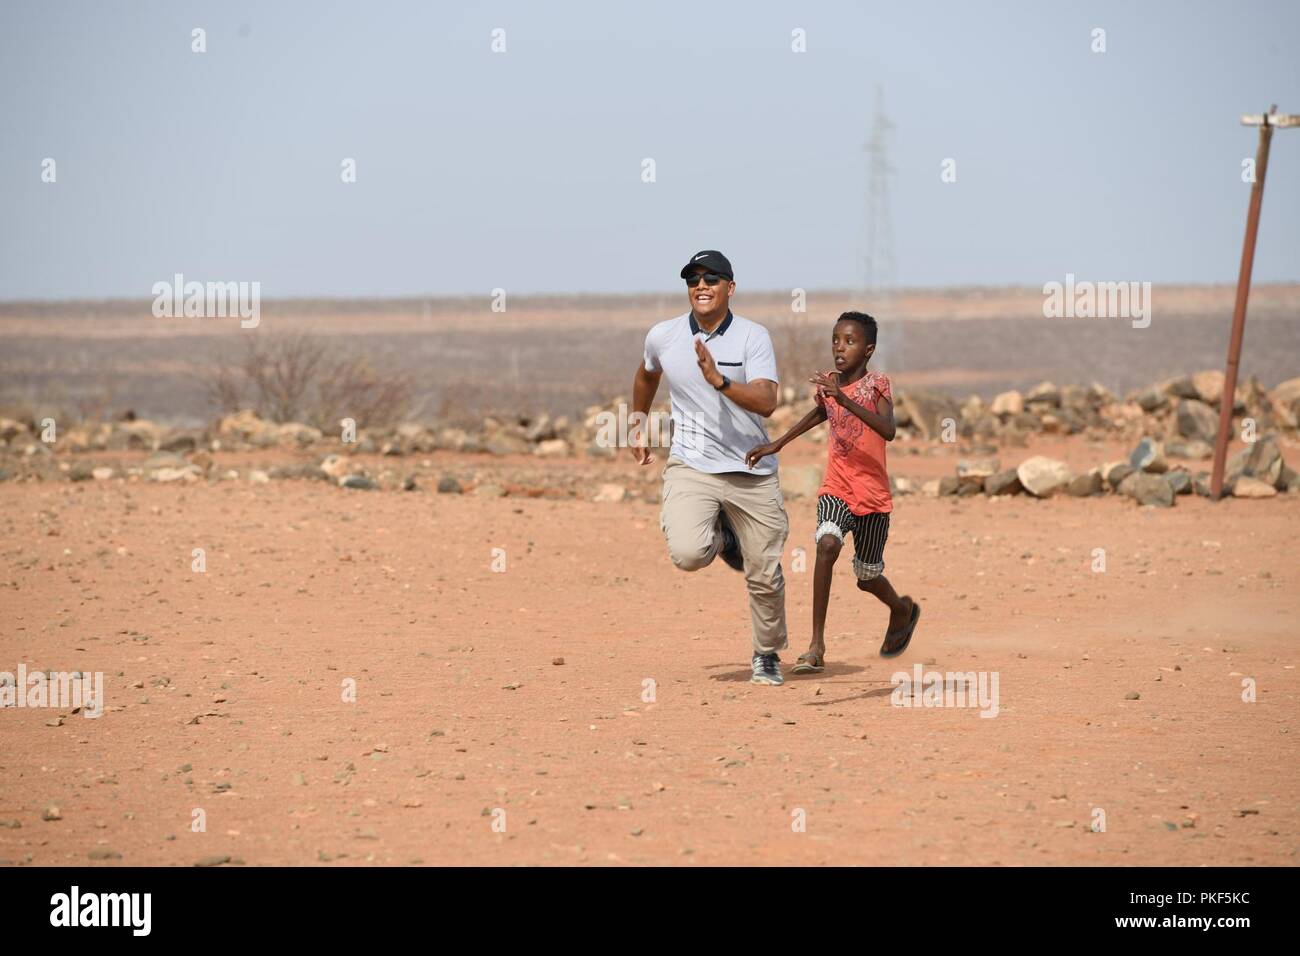 U.S. Air Force 1st Lt. Darren Domingo, a Combat Camera officer deployed to Combined Joint Task Force - Horn of Africa, races with local children at a soccer field in Chabelley, Djibouti, Aug. 3, 2018. Community relations events give service members the opportunity to build relationships and contribute to local communities. Stock Photo